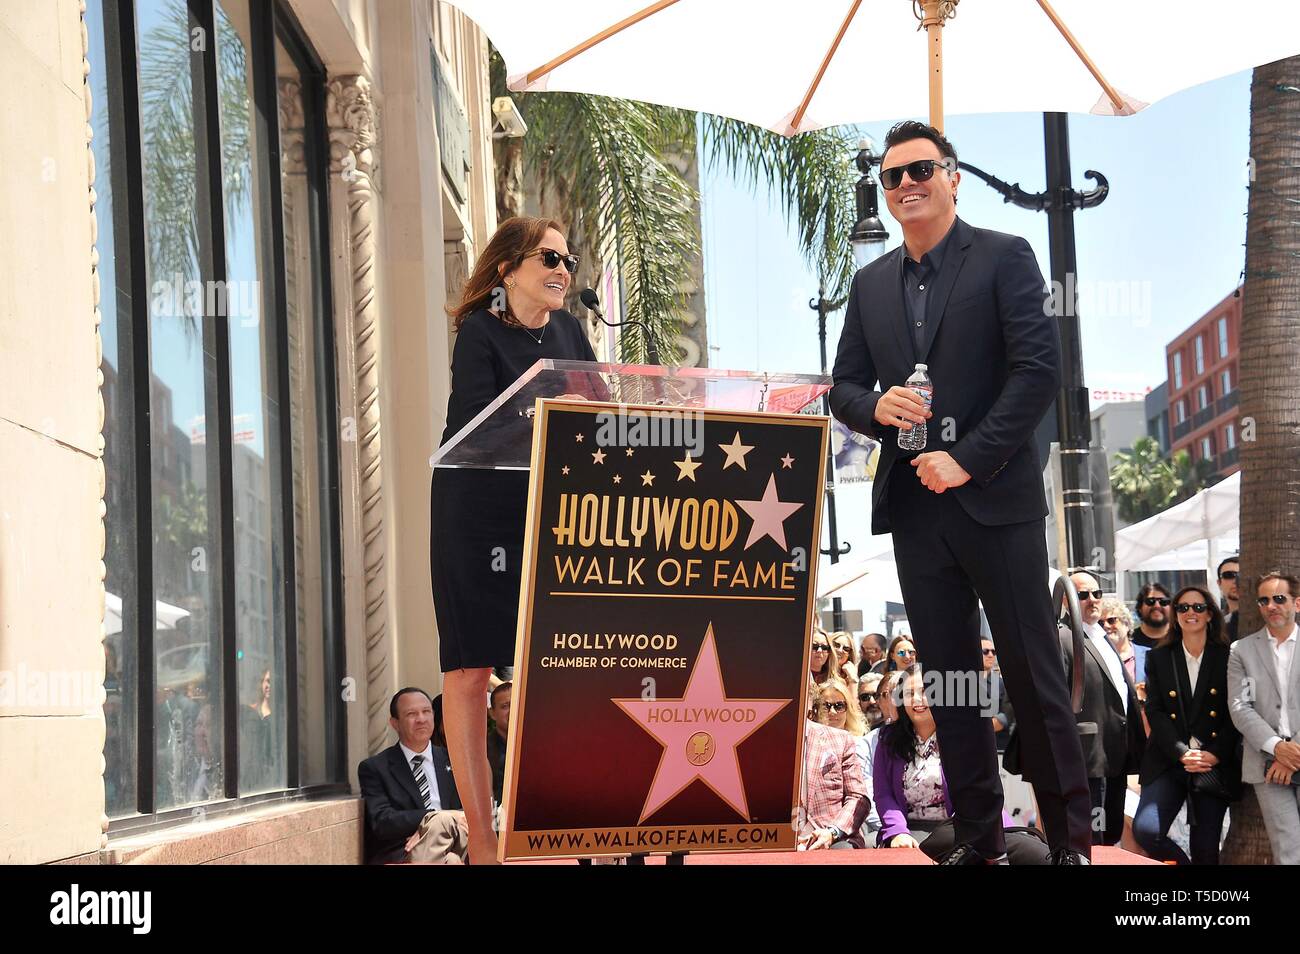 Los Angeles, CA, USA. 23rd Apr, 2019. Ann Druyan, Seth MacFarlane at the induction ceremony for Star on the Hollywood Walk of Fame for Seth McFarland, Hollywood Boulevard, Los Angeles, CA April 23, 2019. Credit: Michael Germana/Everett Collection/Alamy Live News Stock Photo